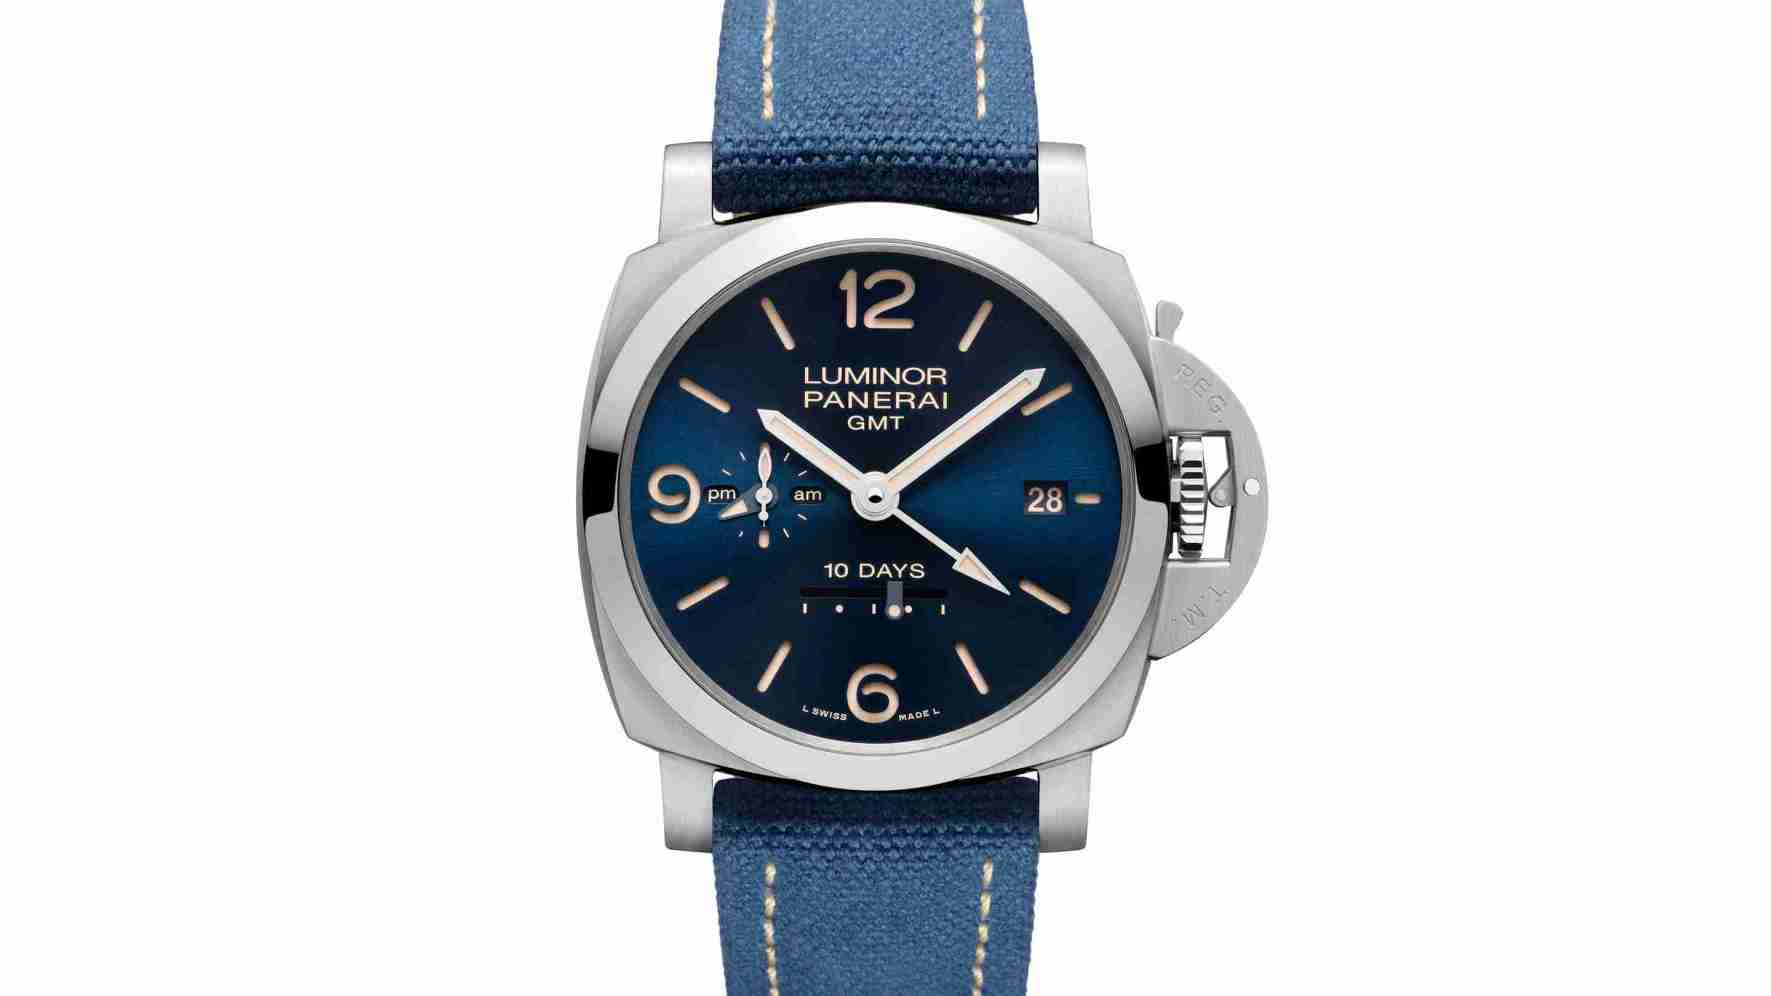 Replica Panerai Luminor 1950 10 Days GMT Automatic Acciaio Limited Edition 44mm Watch For 2018 Winter